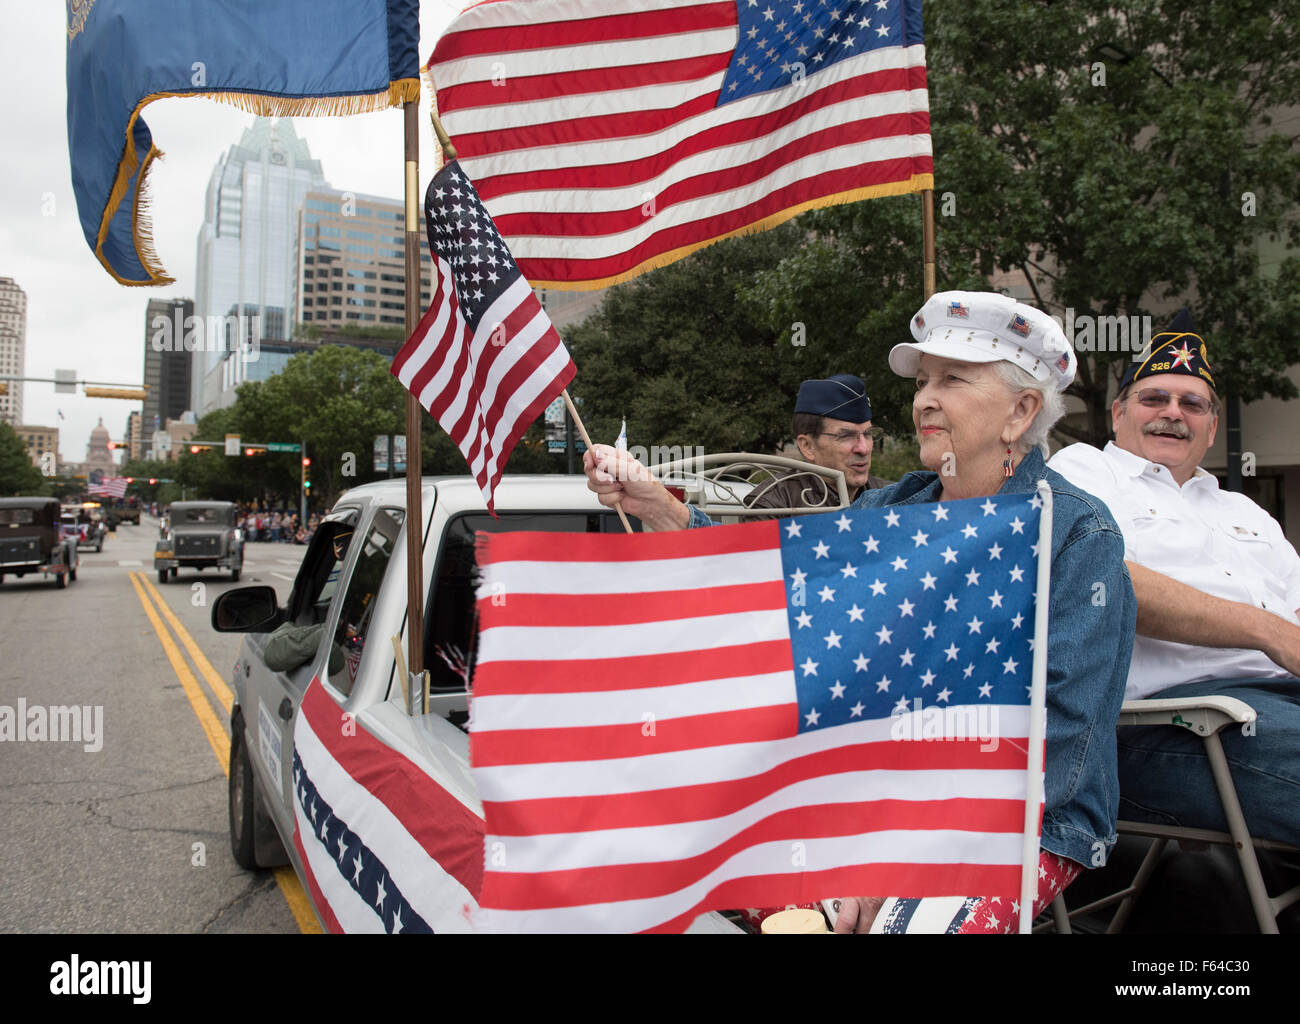 Austin, Texas USA November 11, 2015: The American Legion float during the Veteran's Day parade up Congress Avenue and ceremony at the Texas Capitol. Several thousand Texans lined Congress Avenue to witness military heroes, marching bands and floats in the annual parade. Credit:  Bob Daemmrich/Alamy Live News Stock Photo